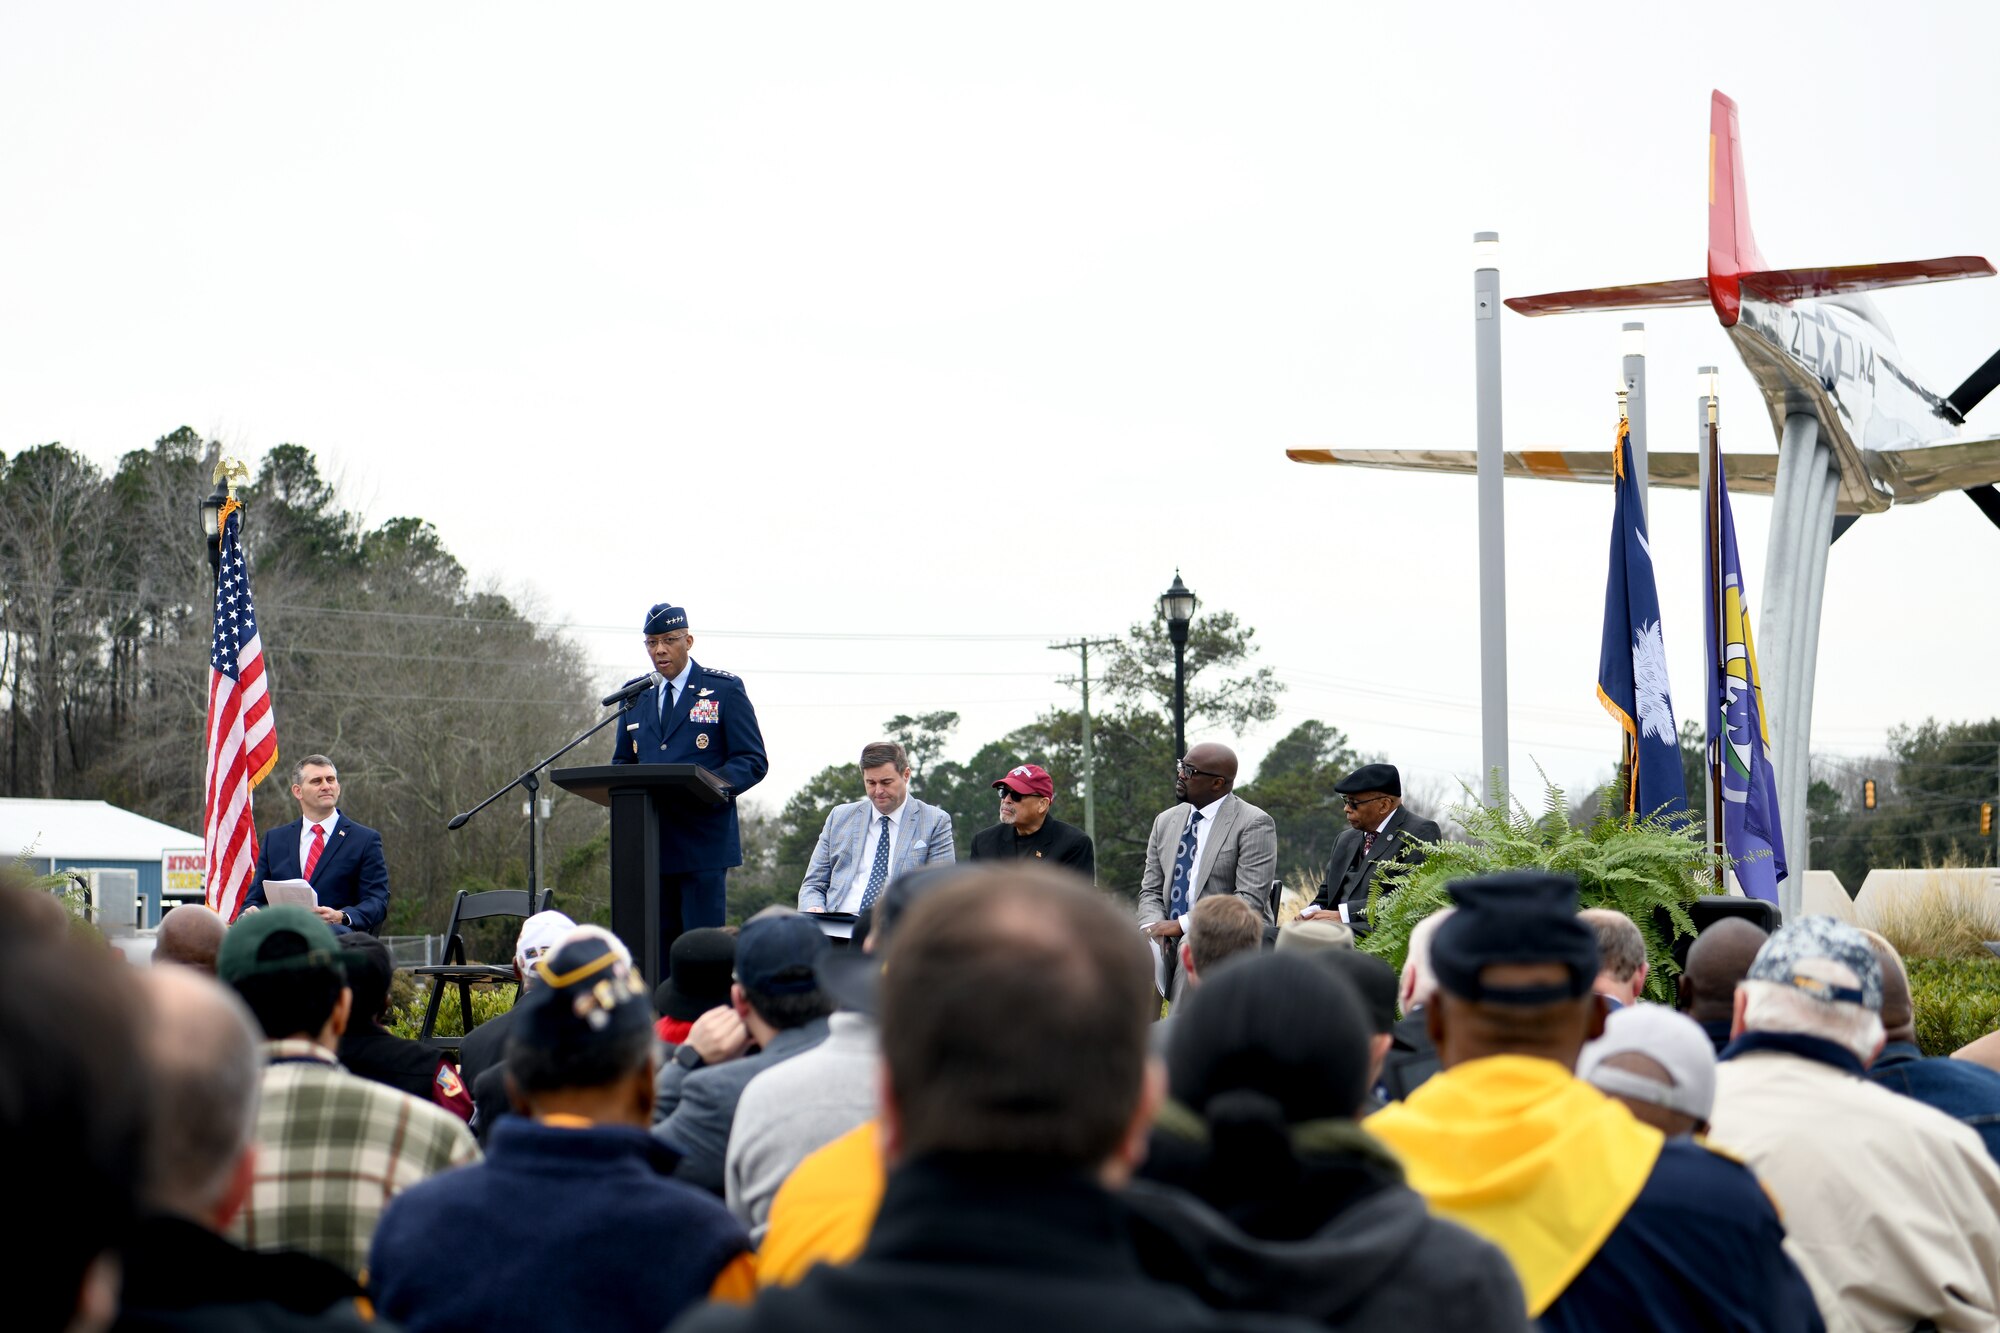 Chairman of the Joint Chiefs of Staff Gen. CQ Brown Jr. speaks during a Tuskegee Airmen Monument dedication ceremony at Veterans Park in Sumter, South Carolina, Feb. 9, 2024. Brown spoke about the historic actions and achievements of the Tuskegee Airmen, including four who had personal ties to Sumter: James Randall, Willie Ashley, Jr., Leroy Bowman and Emmett Rice. (U.S. Air Force photo by Staff Sgt. Kelsey Owen)